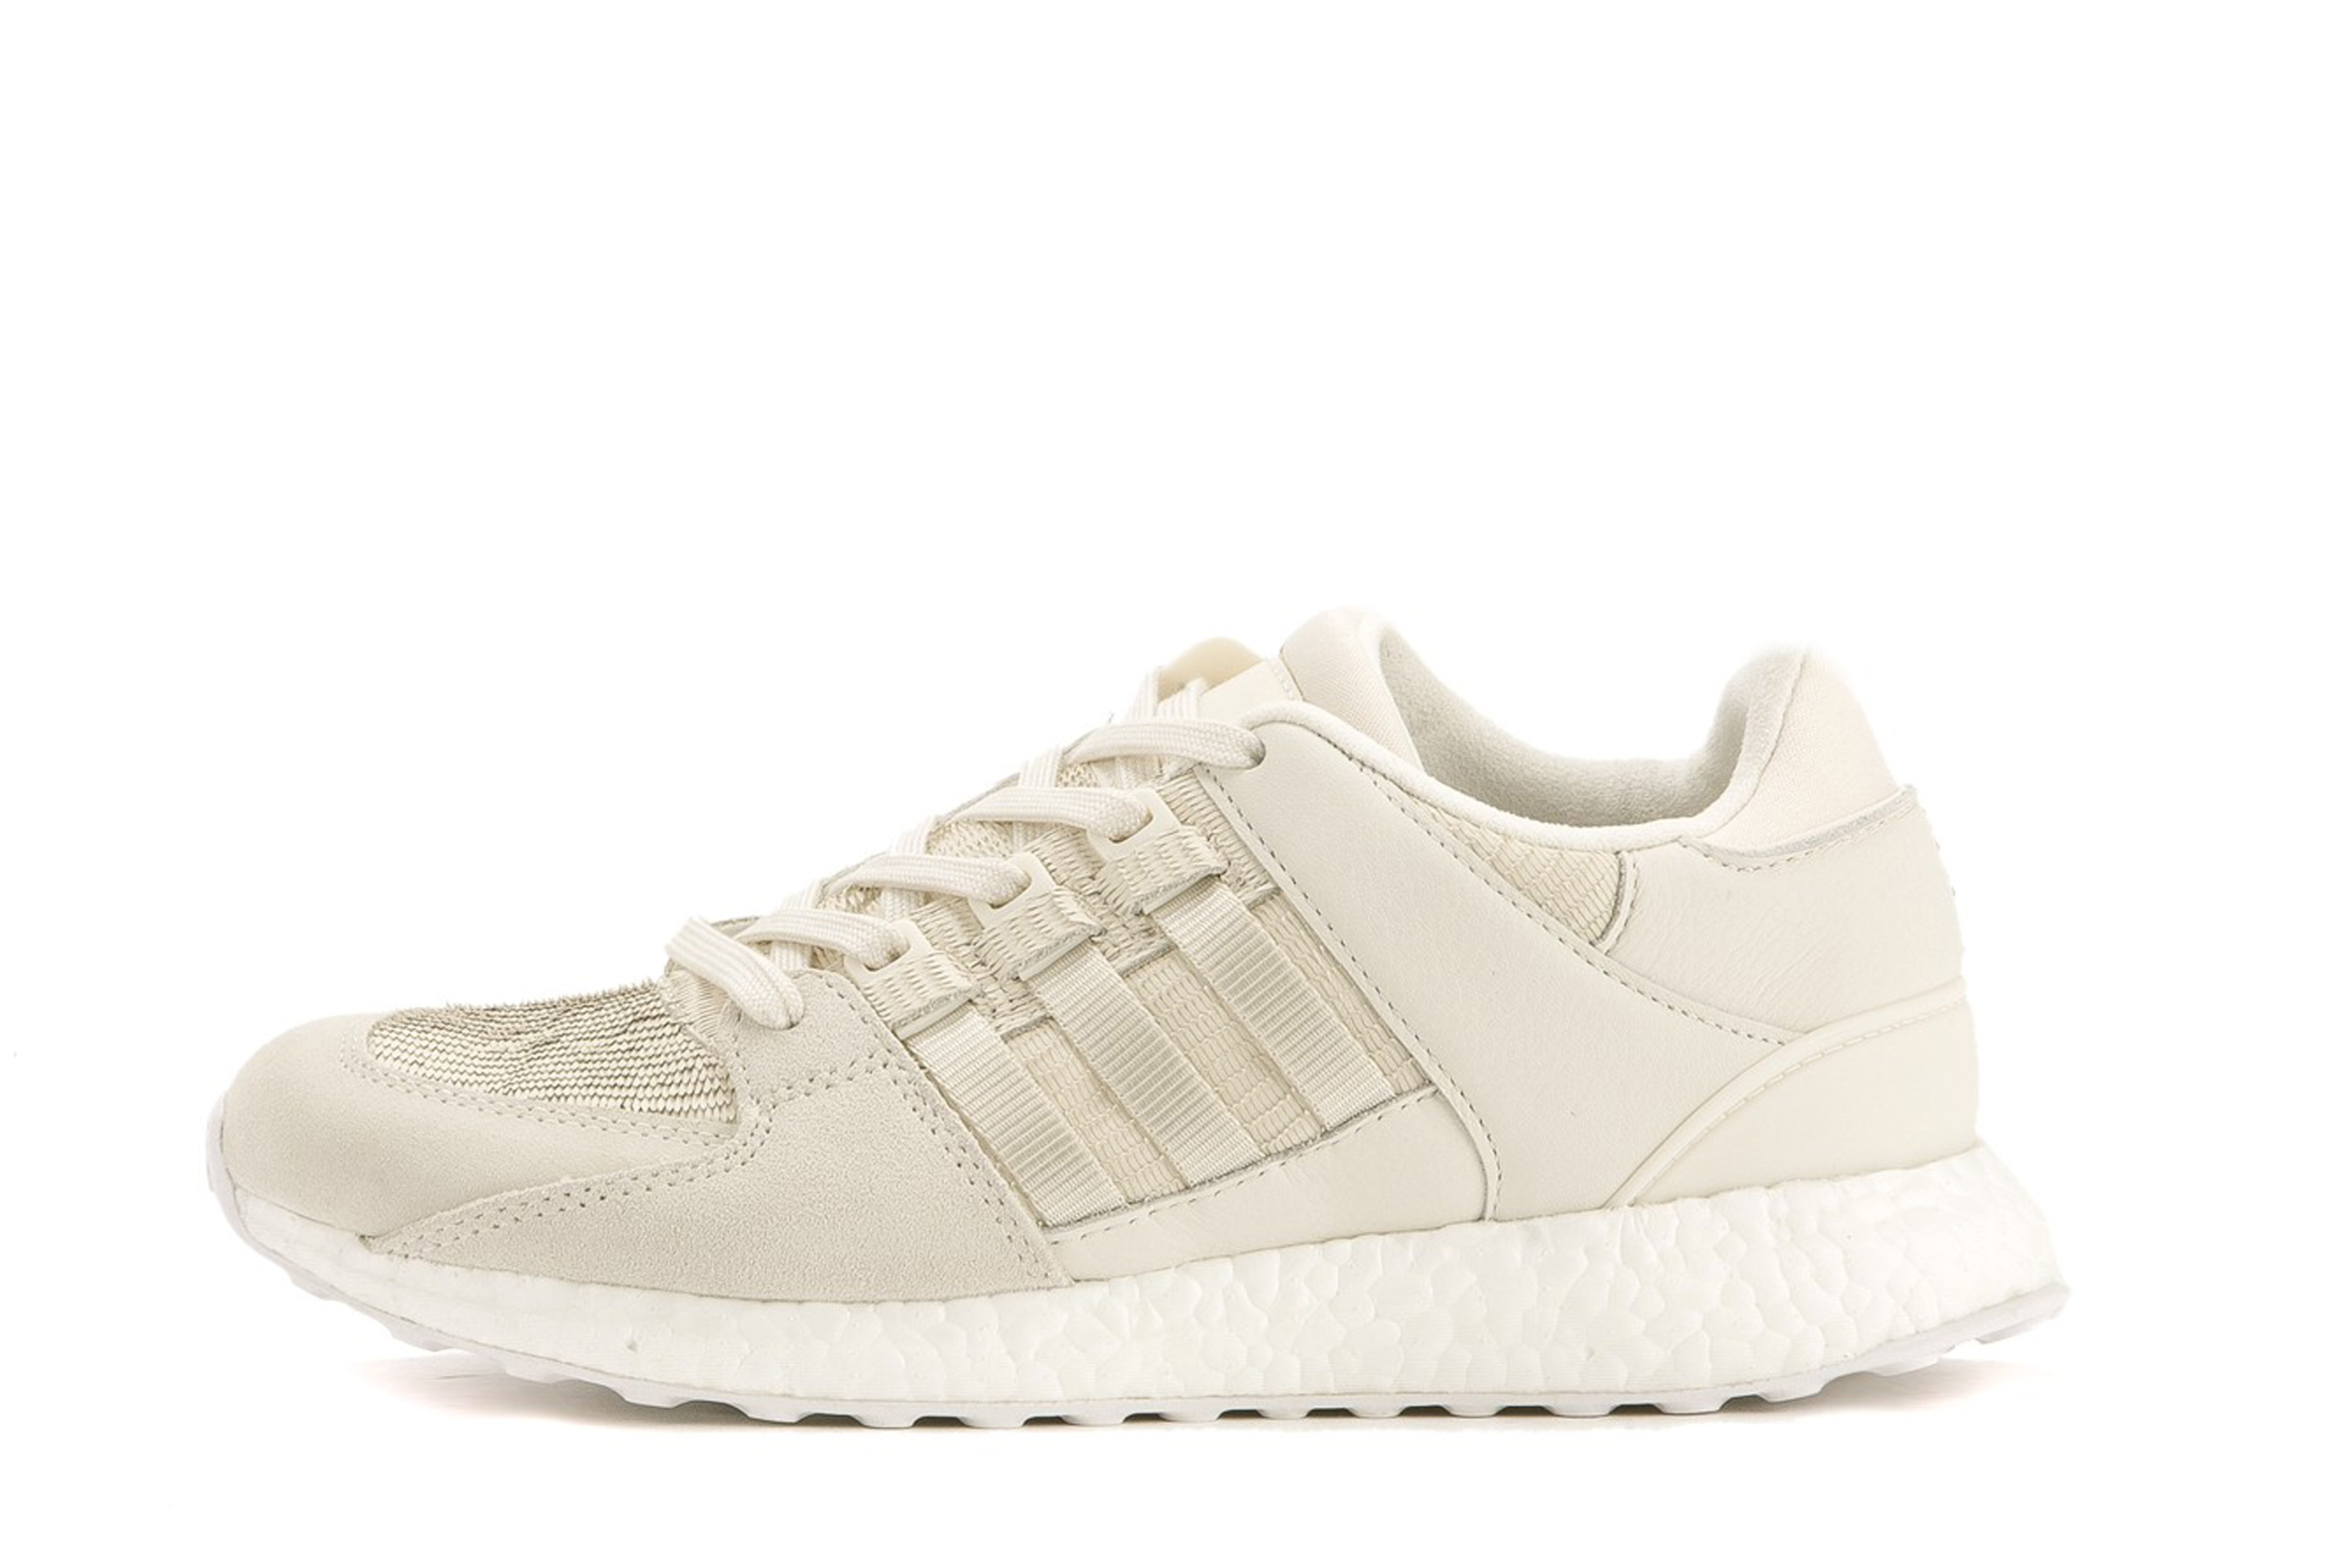 Curiosidad Arrastrarse Perpetuo adidas originals EQT Support Ultra 'Chinese New Year' Sneakers Chalk  White/Chalk White/Footwear White